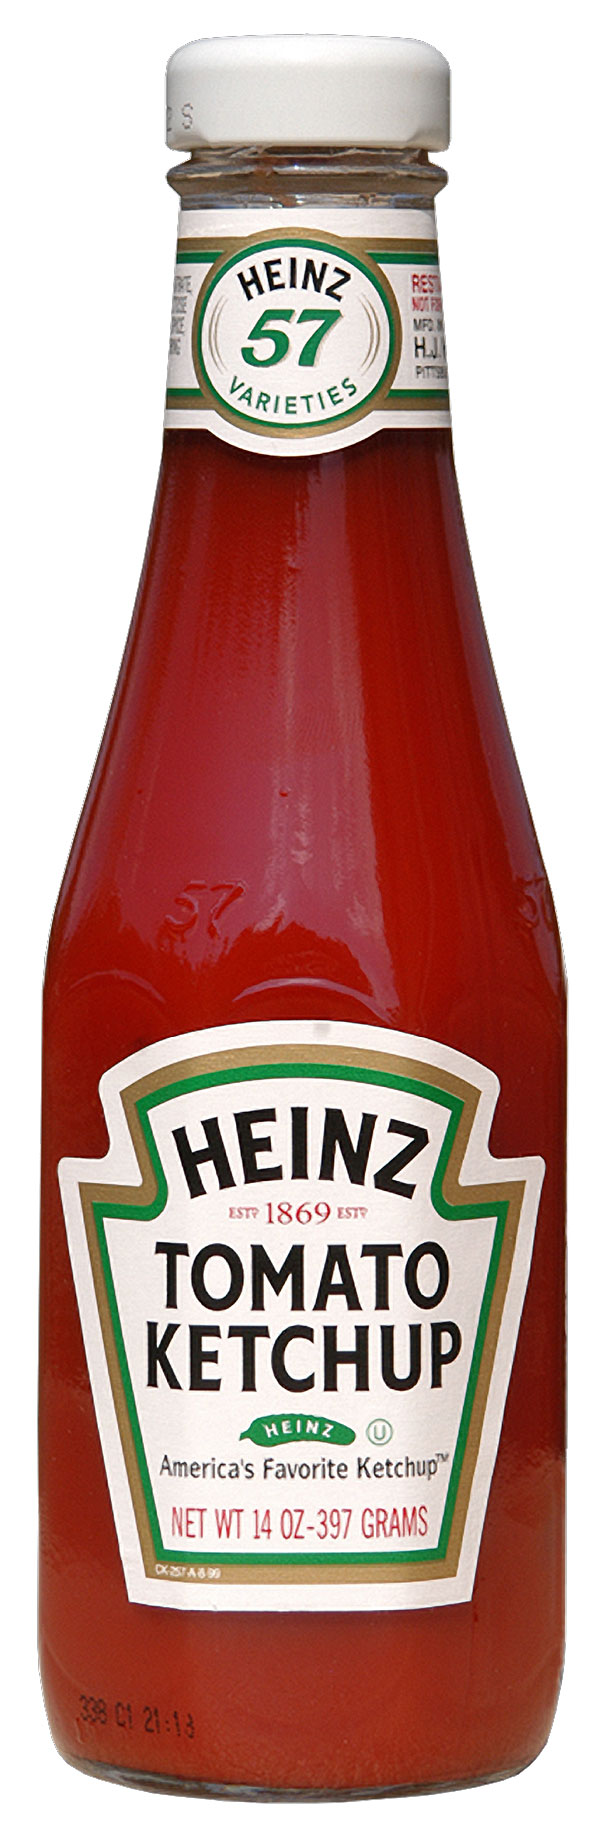 *HOT* Heinz Ketchup, Dr. Pepper, Ore Ida + Other Printable Coupons